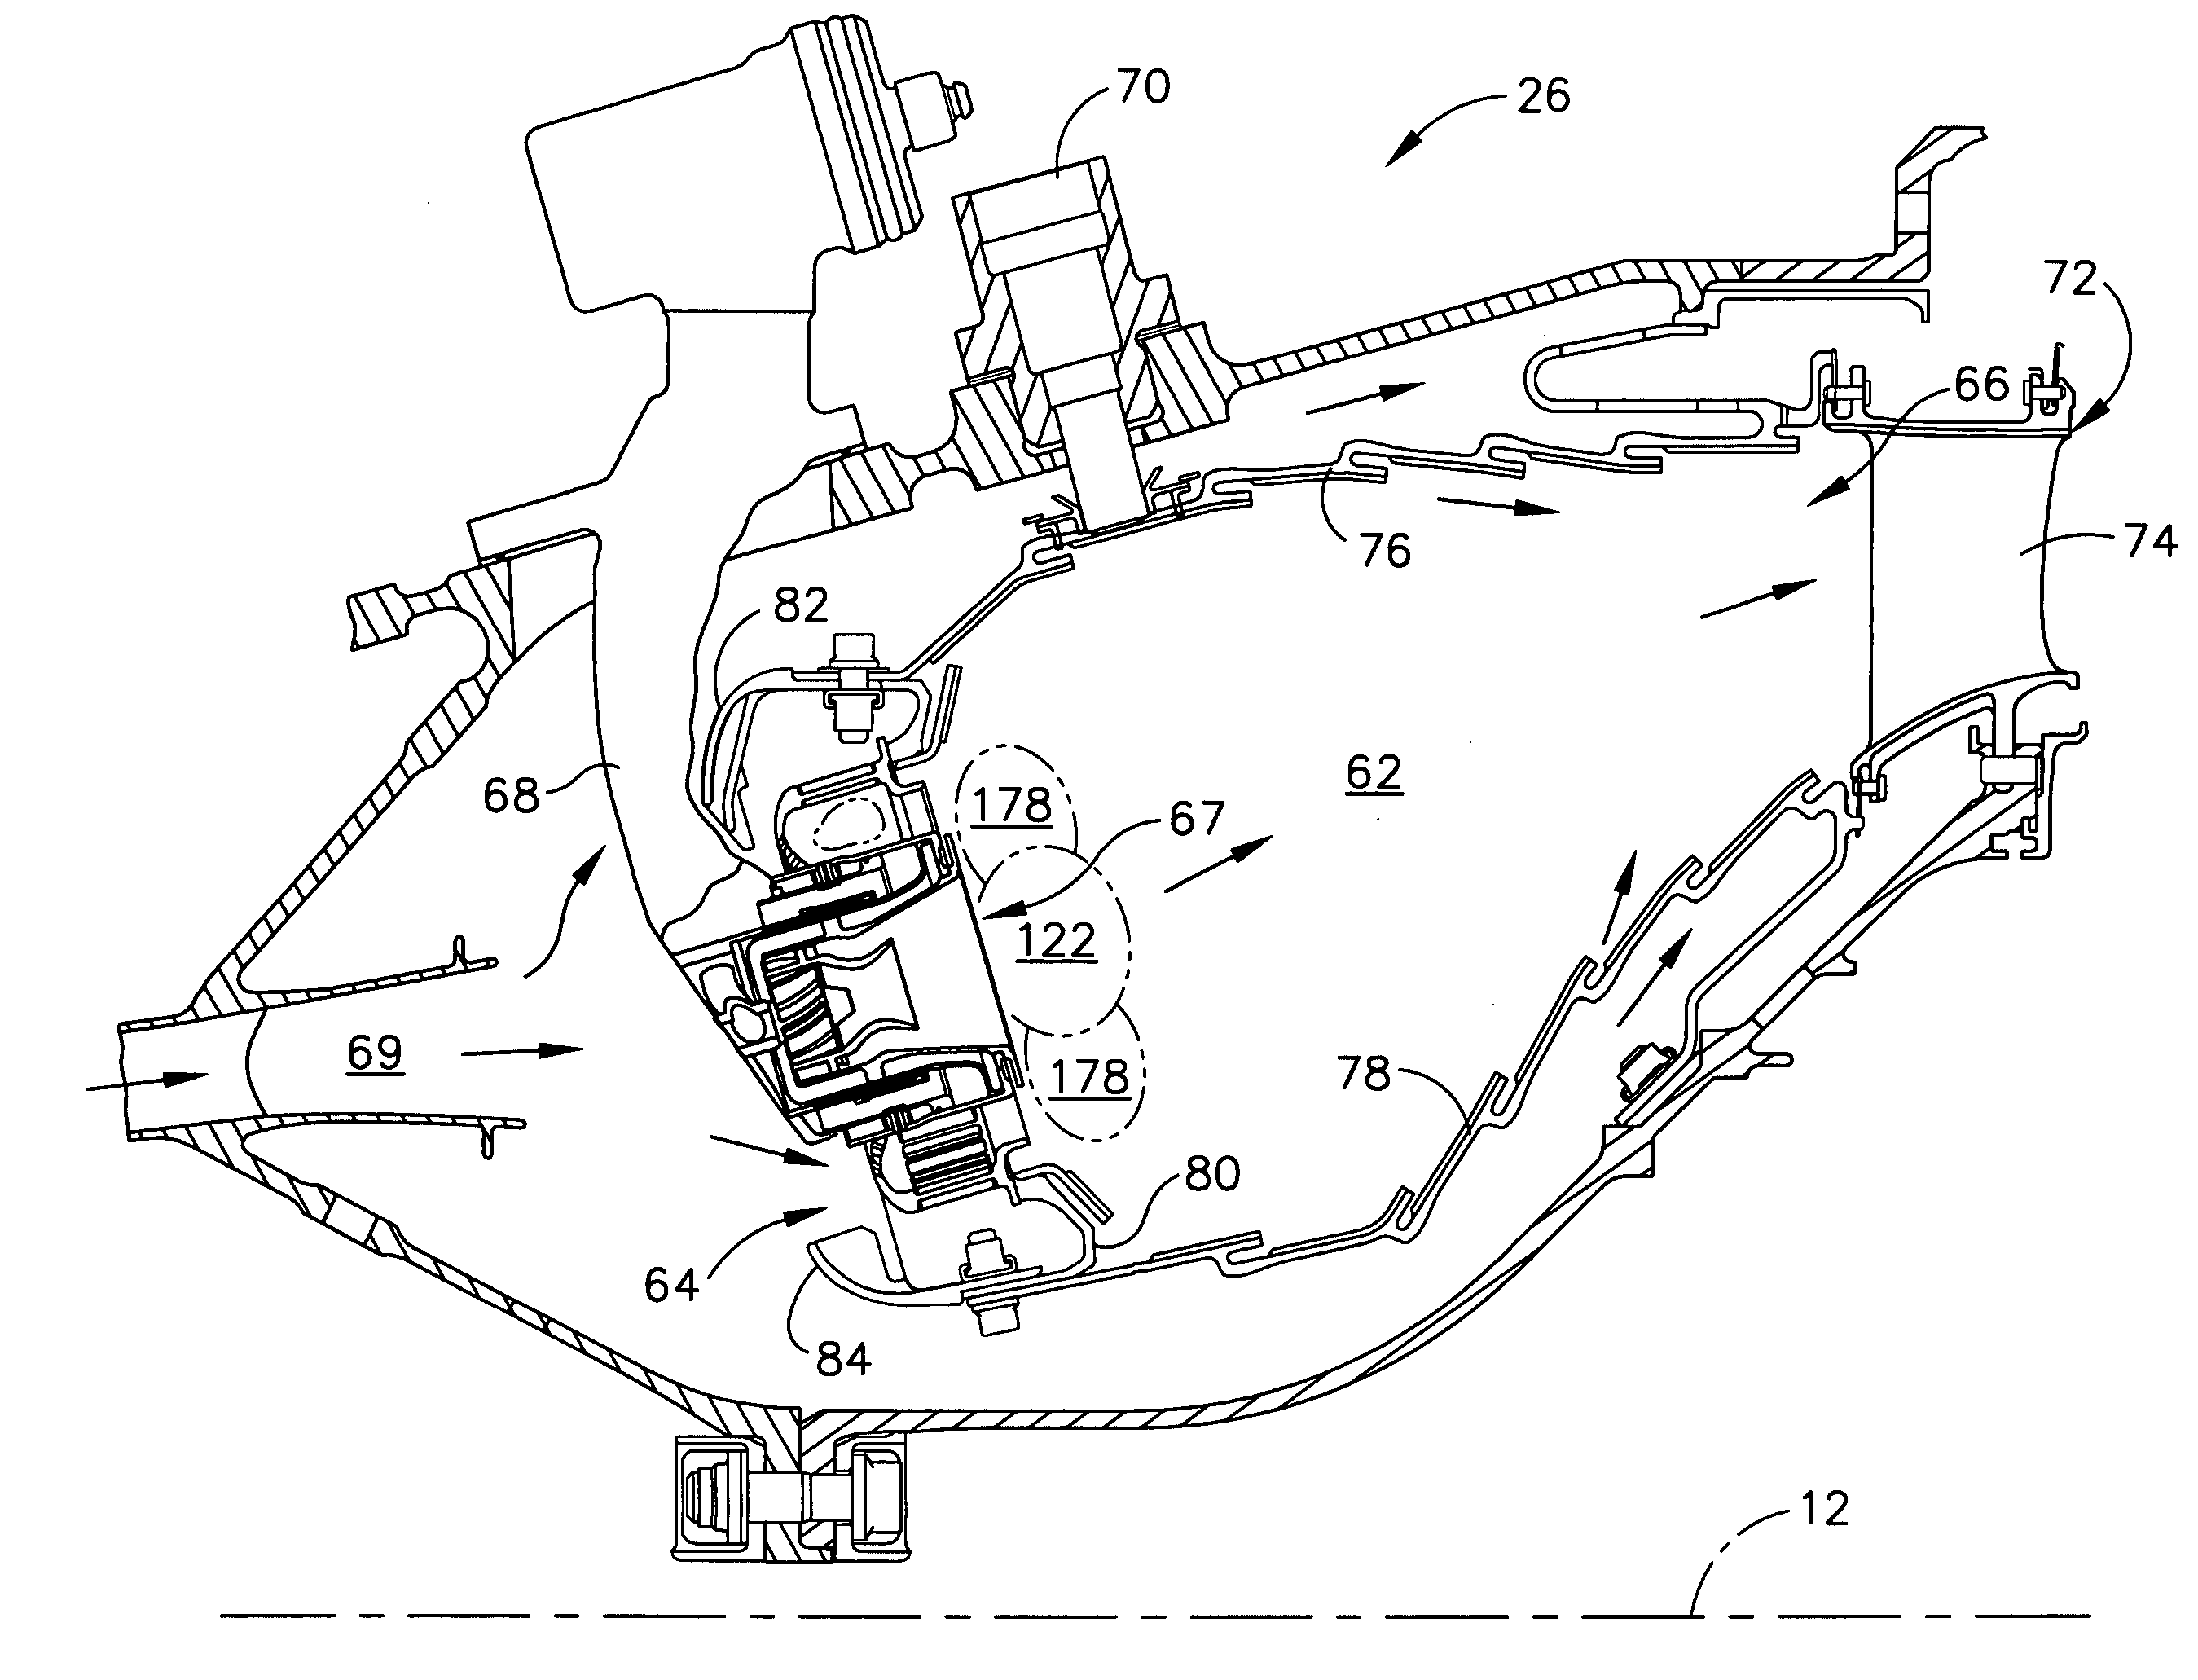 Mixer assembly for combustor of a gas turbine engine having a main mixer with improved fuel penetration